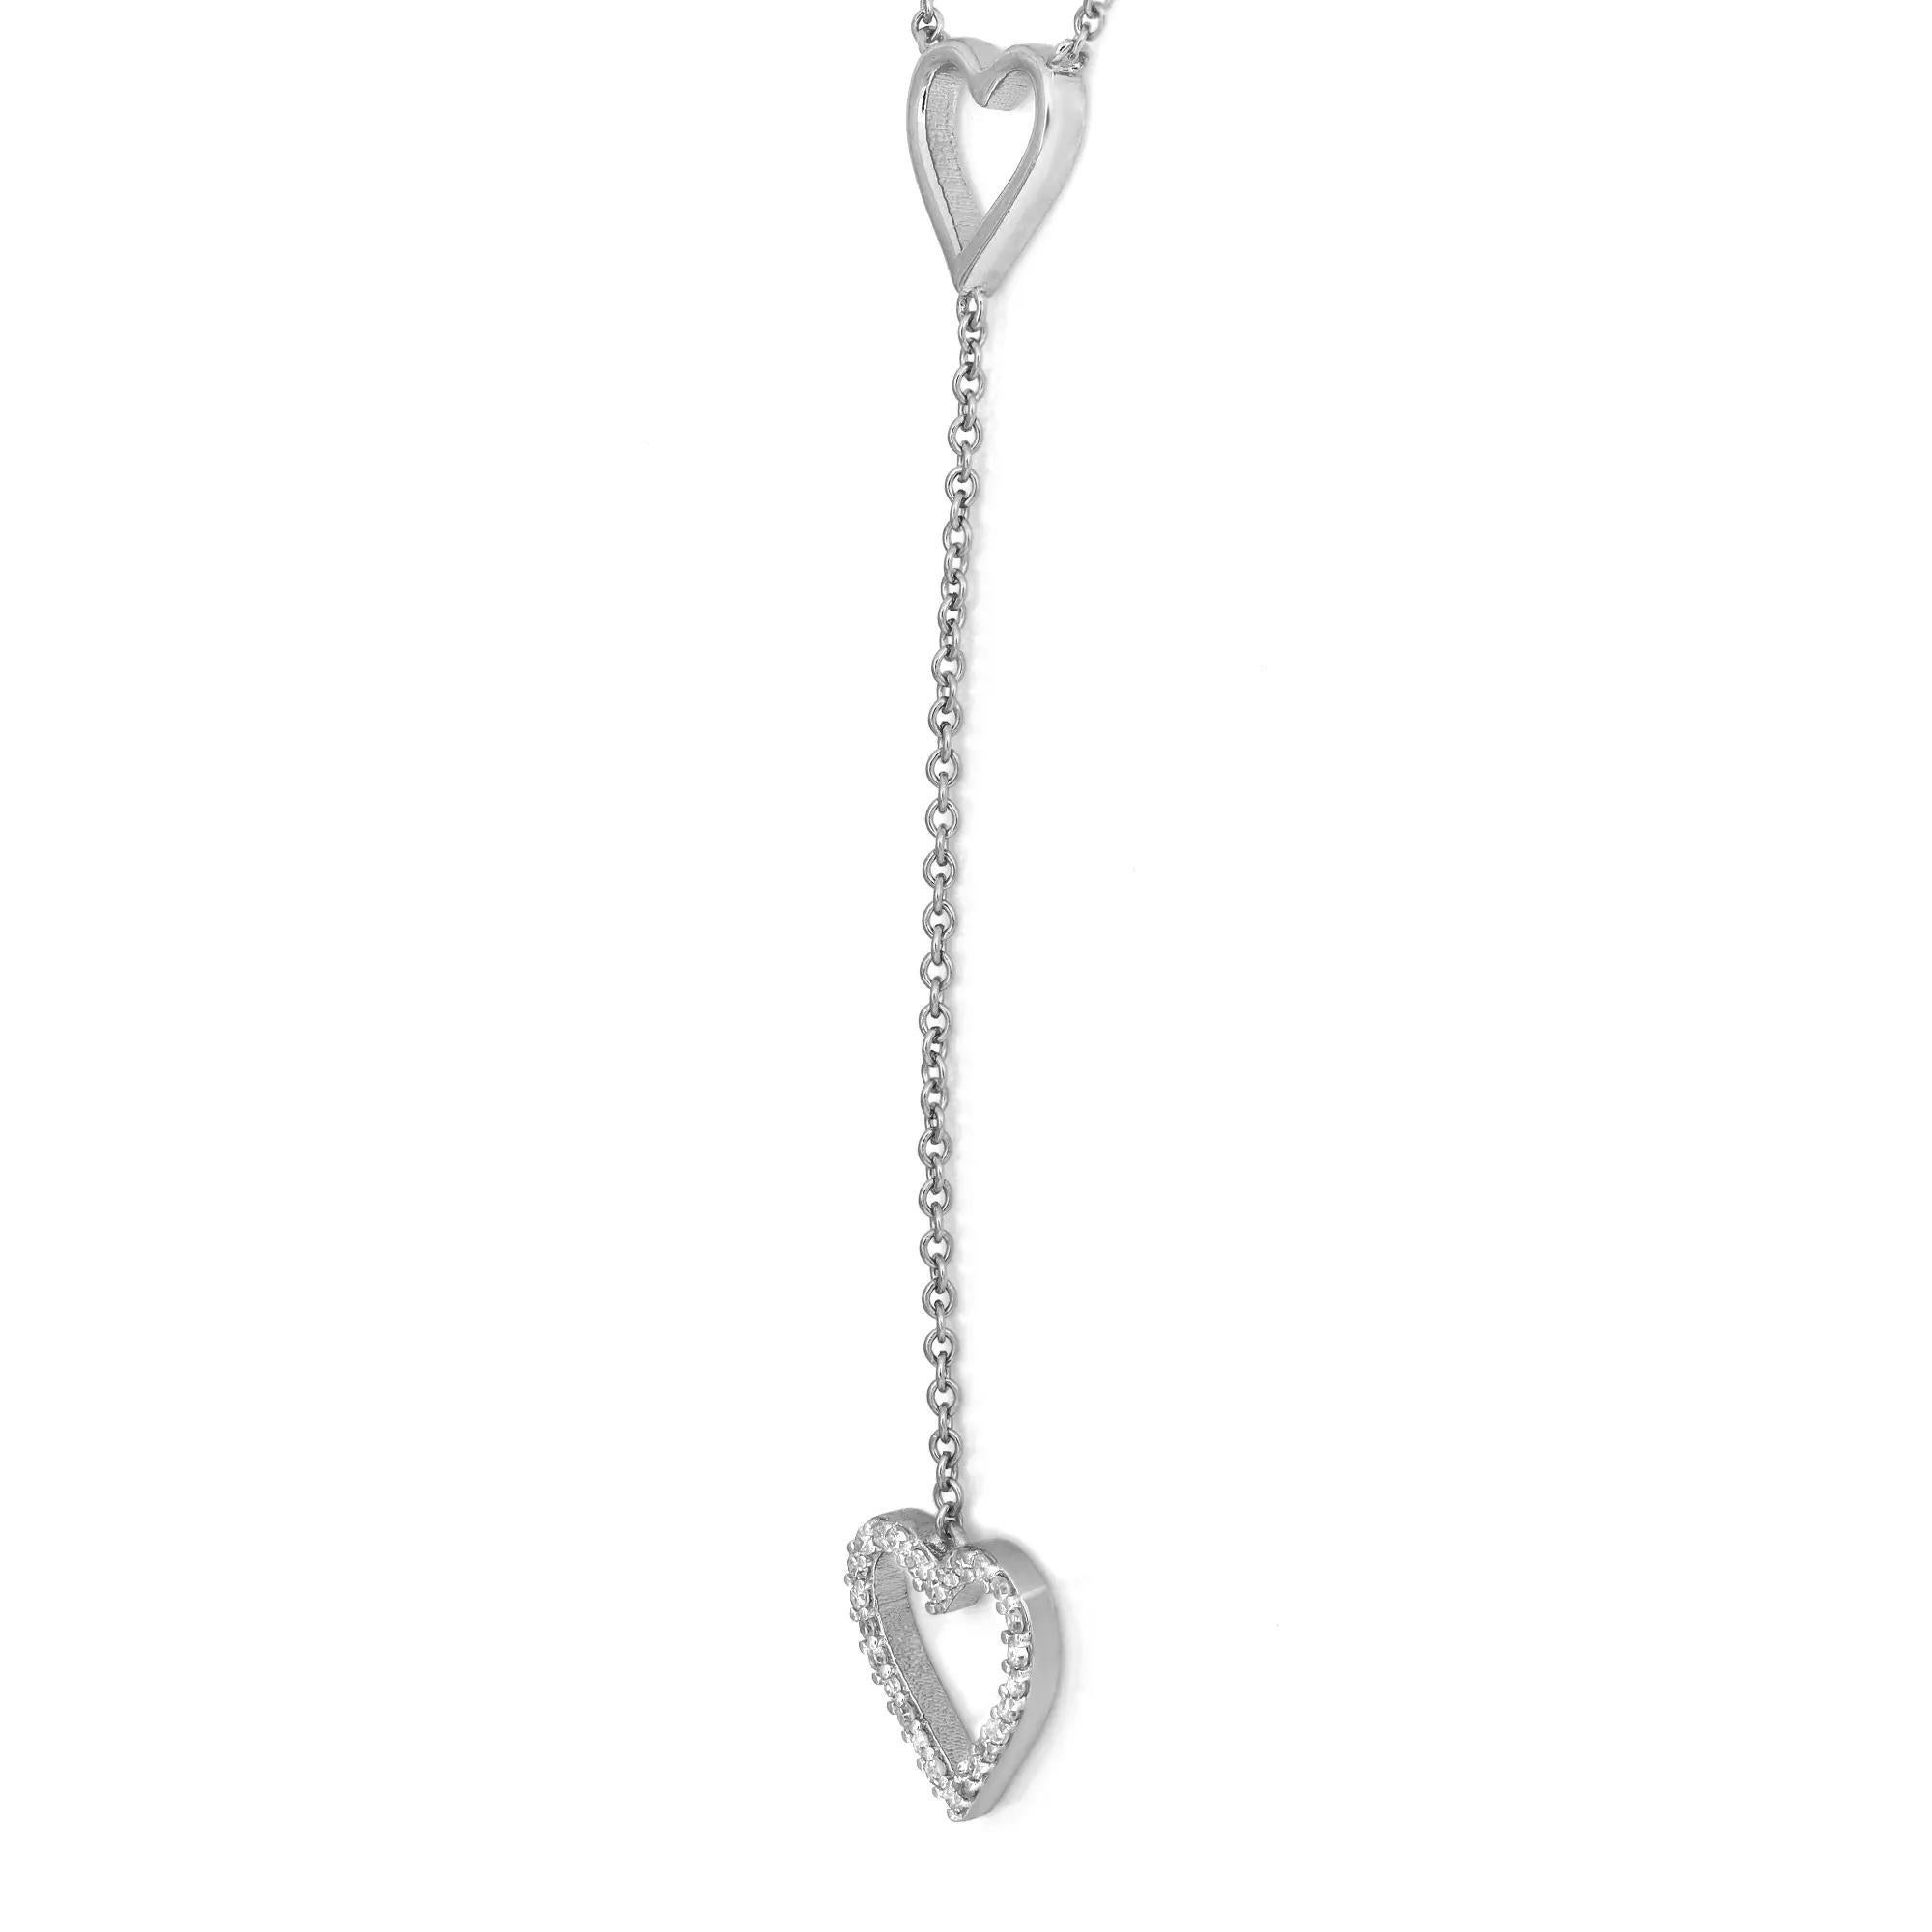 Beautiful and delicate this diamond lariat necklace will leave everyone speechless the moment they see it. Crafted in high polished 14K white gold. It features two pave set diamond studded heart shape motifs with a heart cut out in the center,